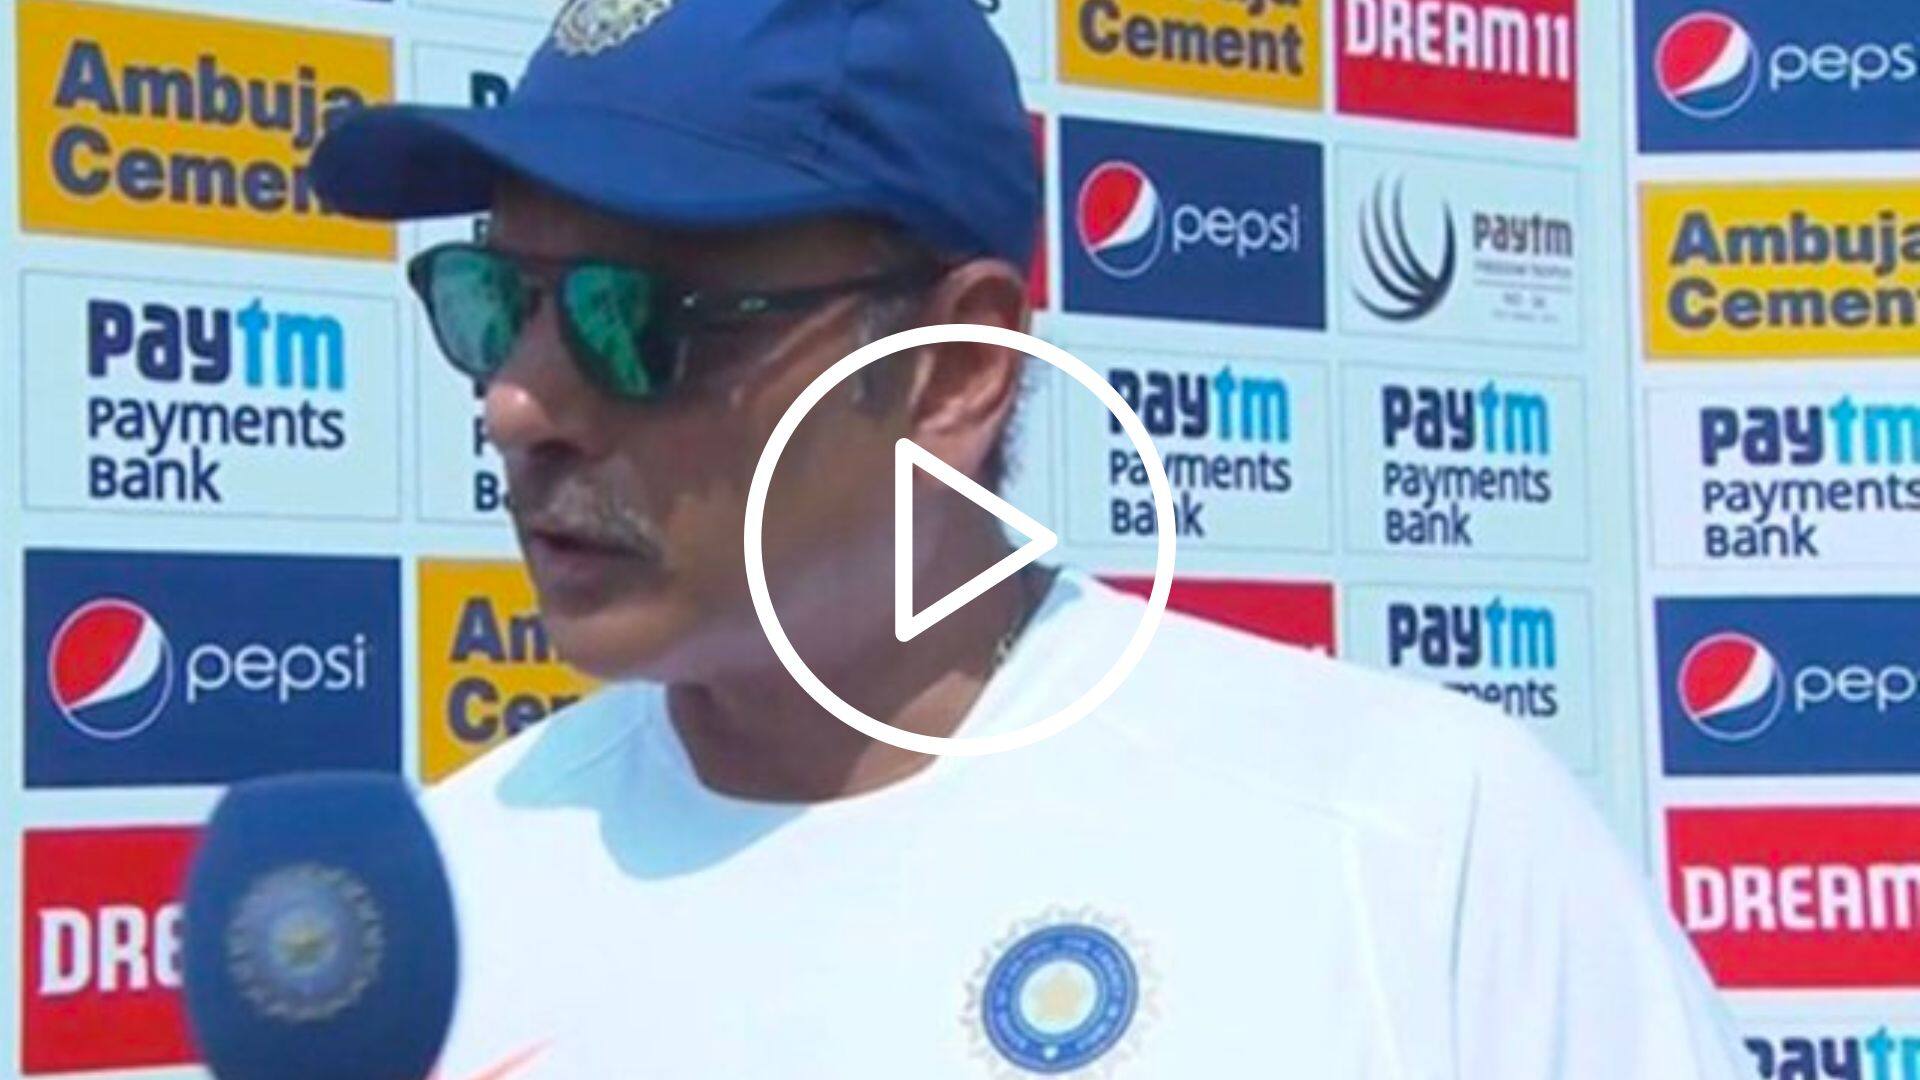 'Bhaad Me Gaya Pitch': Former India Coach Ravi Shastri Rant Goes Viral As Australia Dismantle India in WTC Final [Watch]